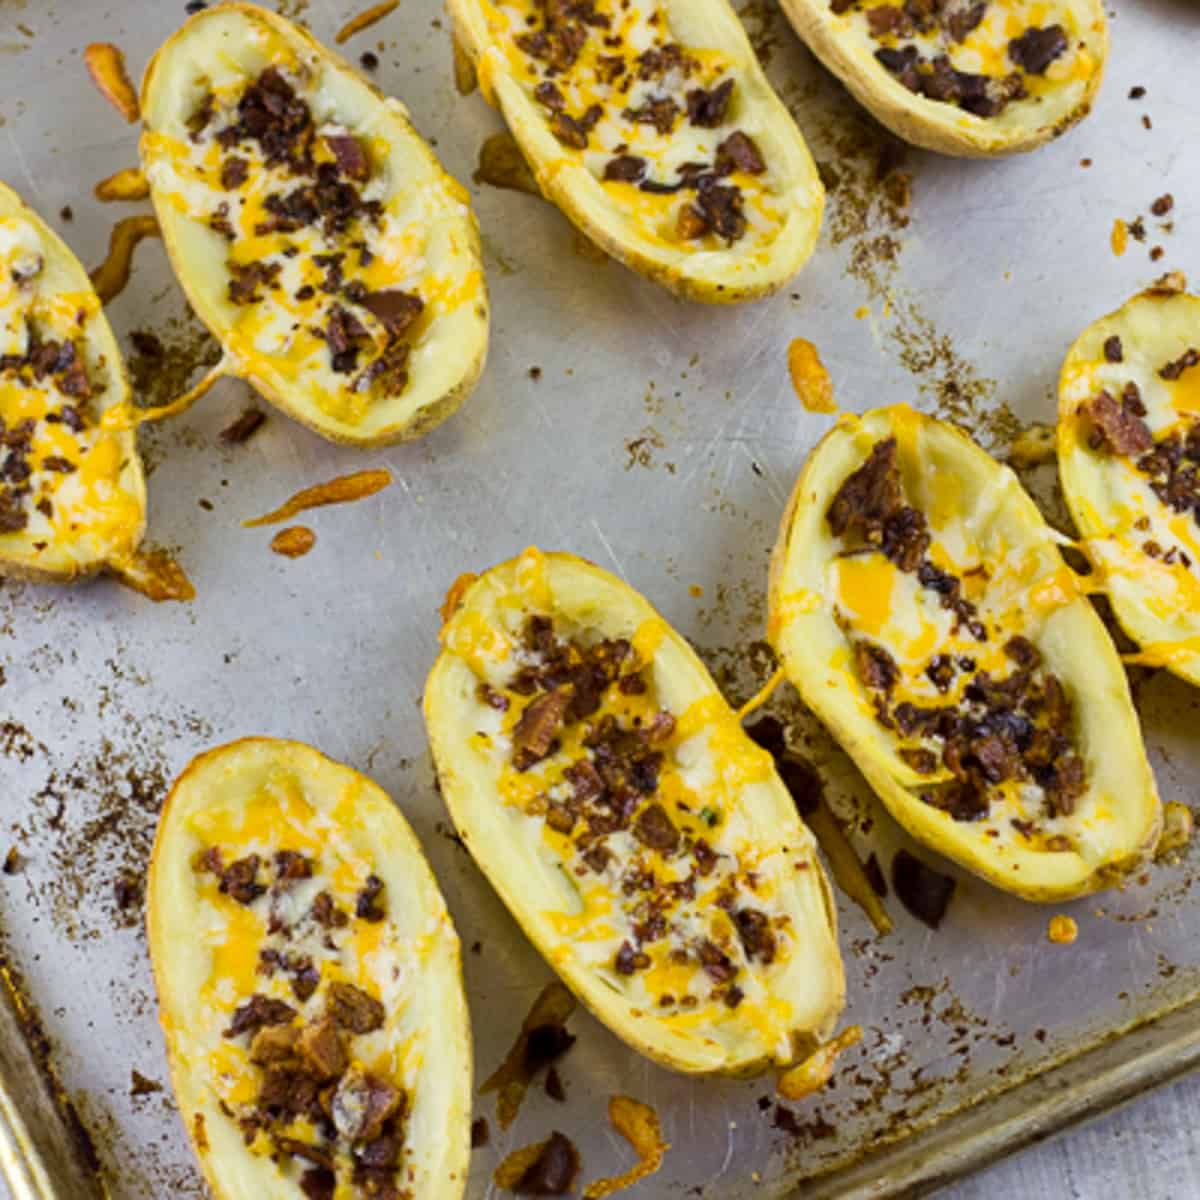 Bacon and cheddar cheese sprinkles on the hollowed out halves of potatoes.